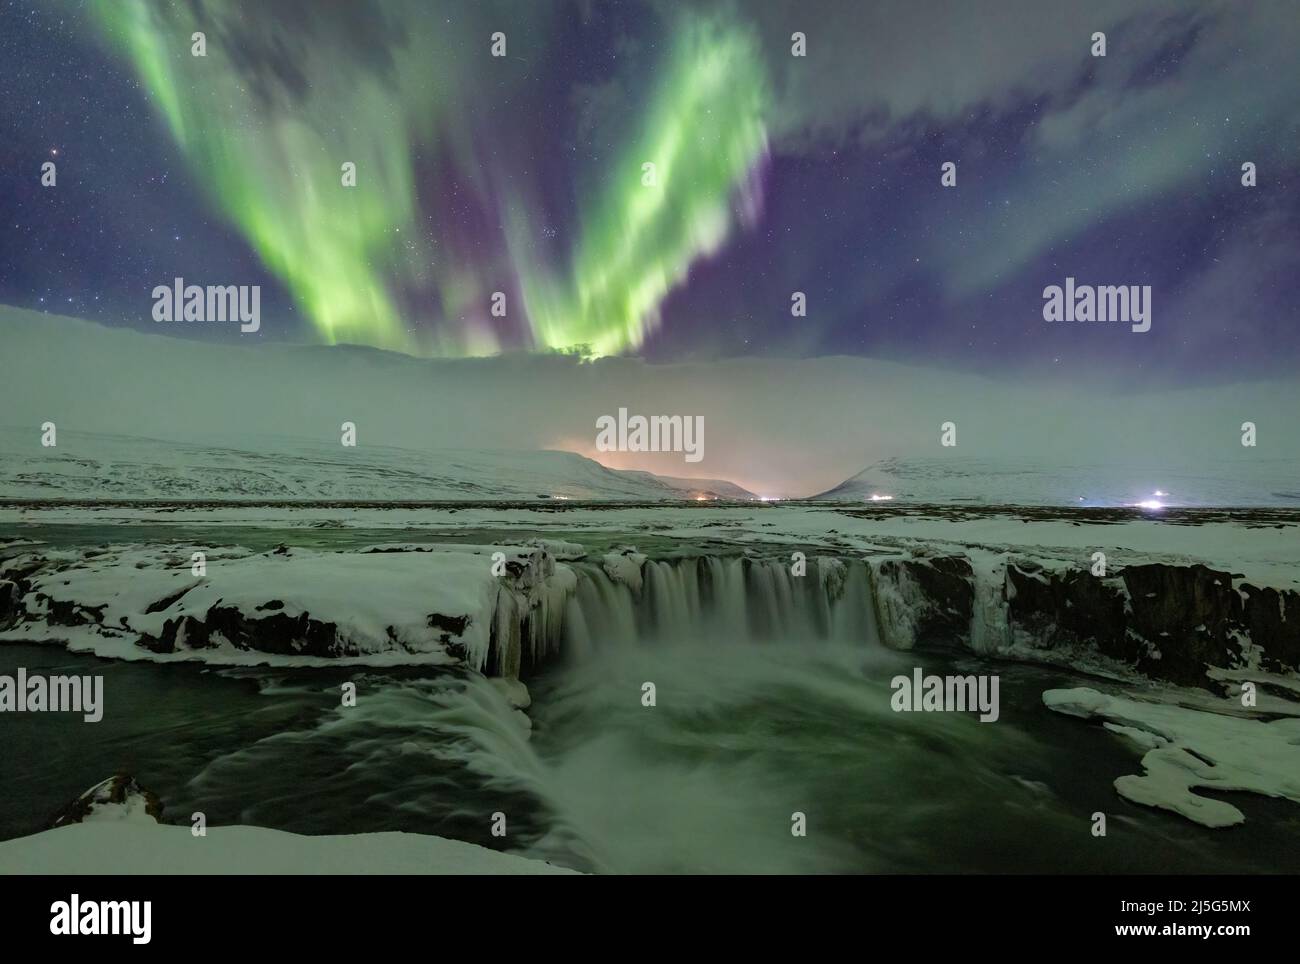 Spectacular photos of the Nature of Iceland with northern lights, snow, waterfalls, frozen rivers... Stock Photo